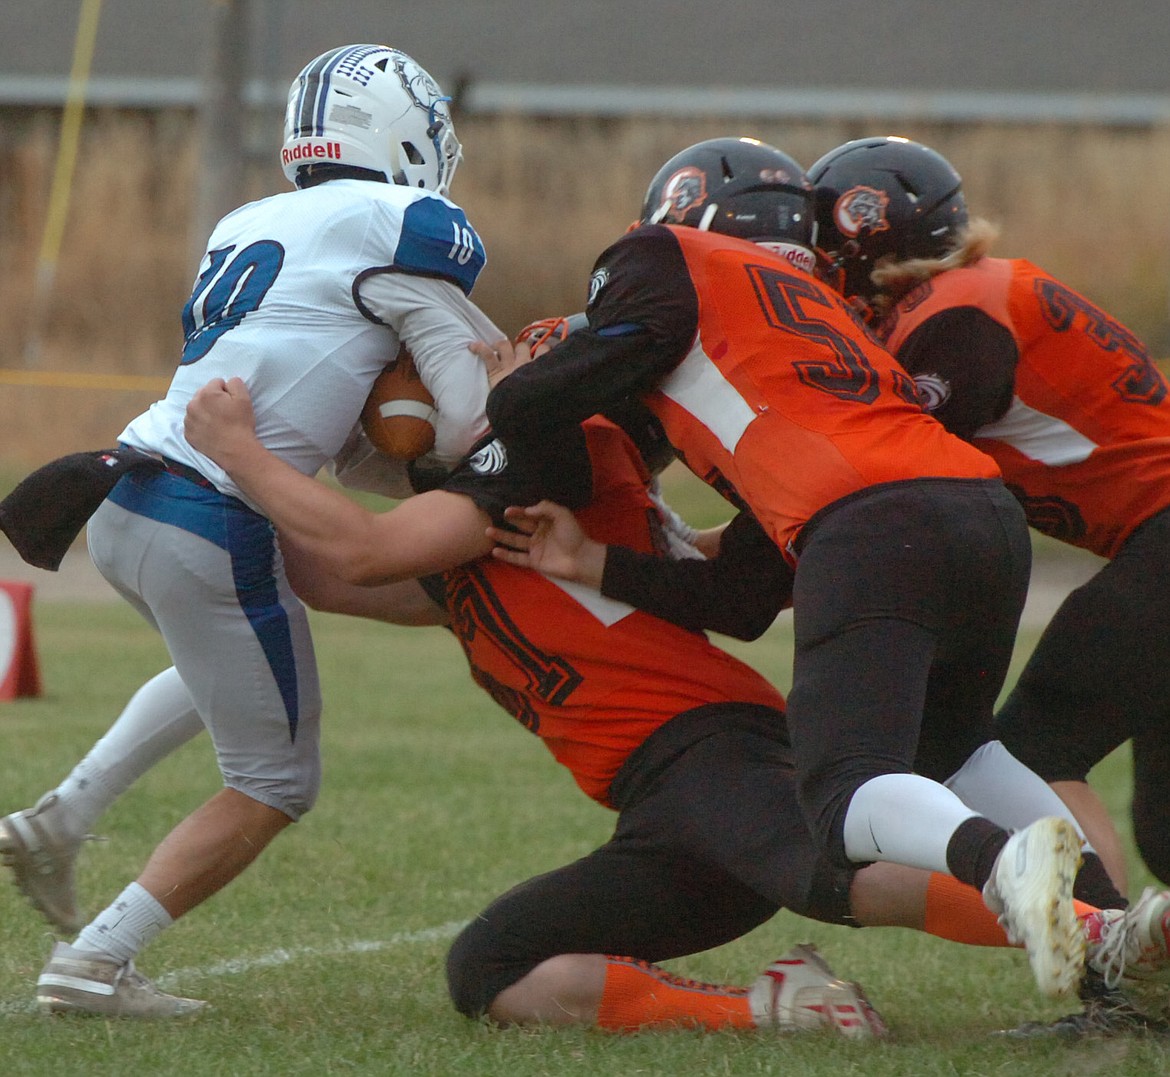 Plains defenders Rusty Stuart (67), Tucker Foster (55) and Malachi Paulsen (30) team up to tackle Mission quarterback Isaac Dumontier during the Horsemen Homecoming game Friday night. The Bulldogs rallied for a 44-40 victory. (Joe Sova photos/Clark Fork Valley Press)